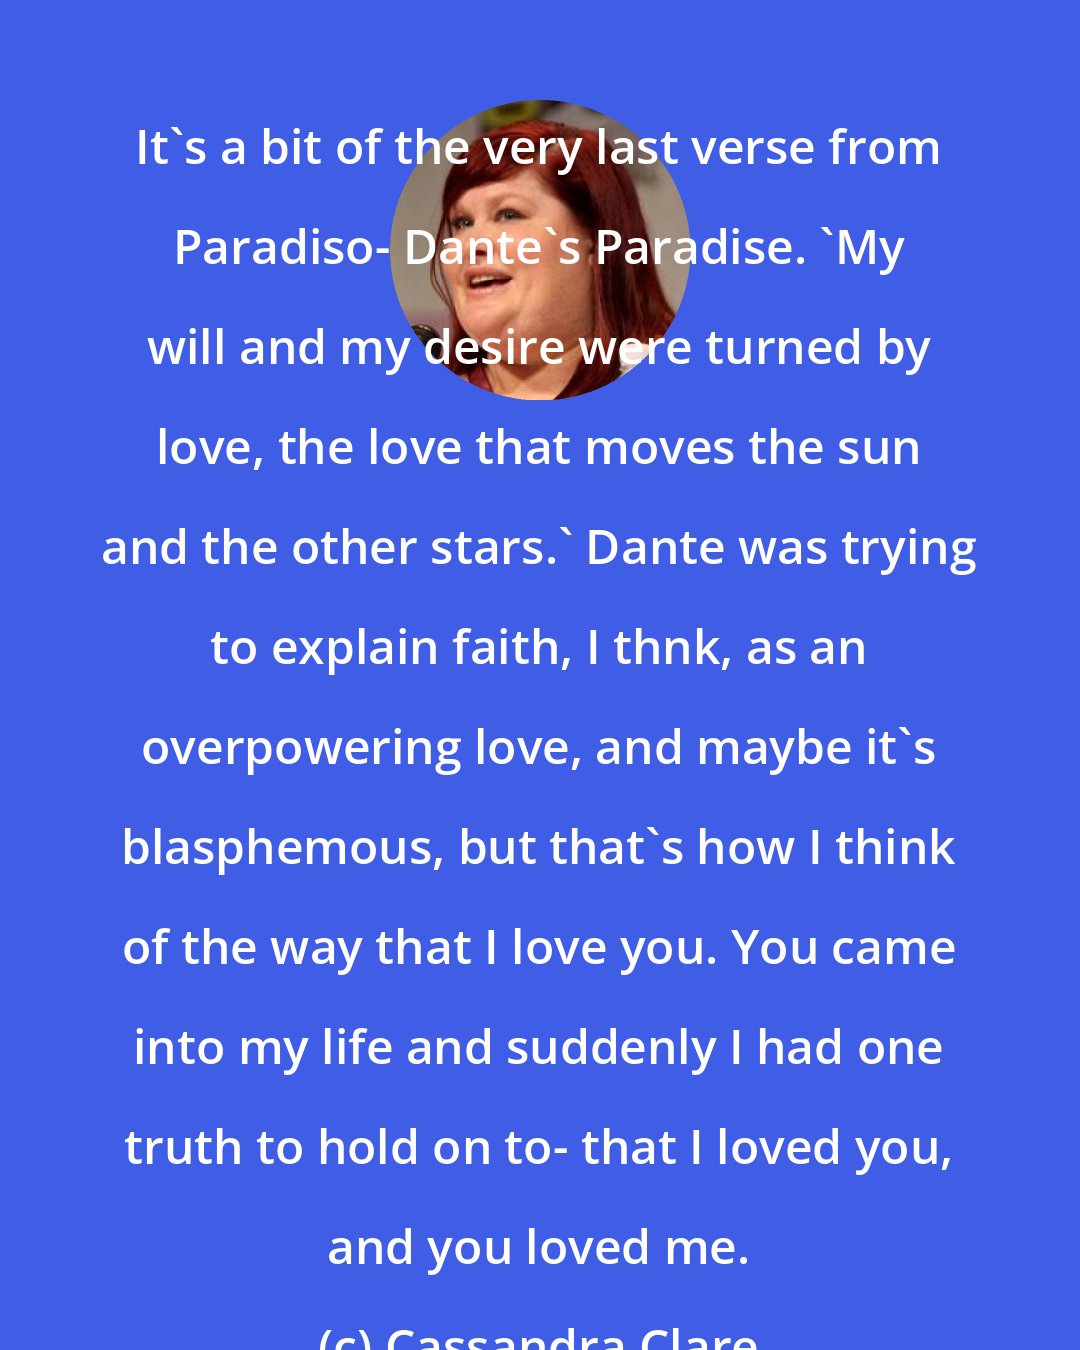 Cassandra Clare: It's a bit of the very last verse from Paradiso- Dante's Paradise. 'My will and my desire were turned by love, the love that moves the sun and the other stars.' Dante was trying to explain faith, I thnk, as an overpowering love, and maybe it's blasphemous, but that's how I think of the way that I love you. You came into my life and suddenly I had one truth to hold on to- that I loved you, and you loved me.